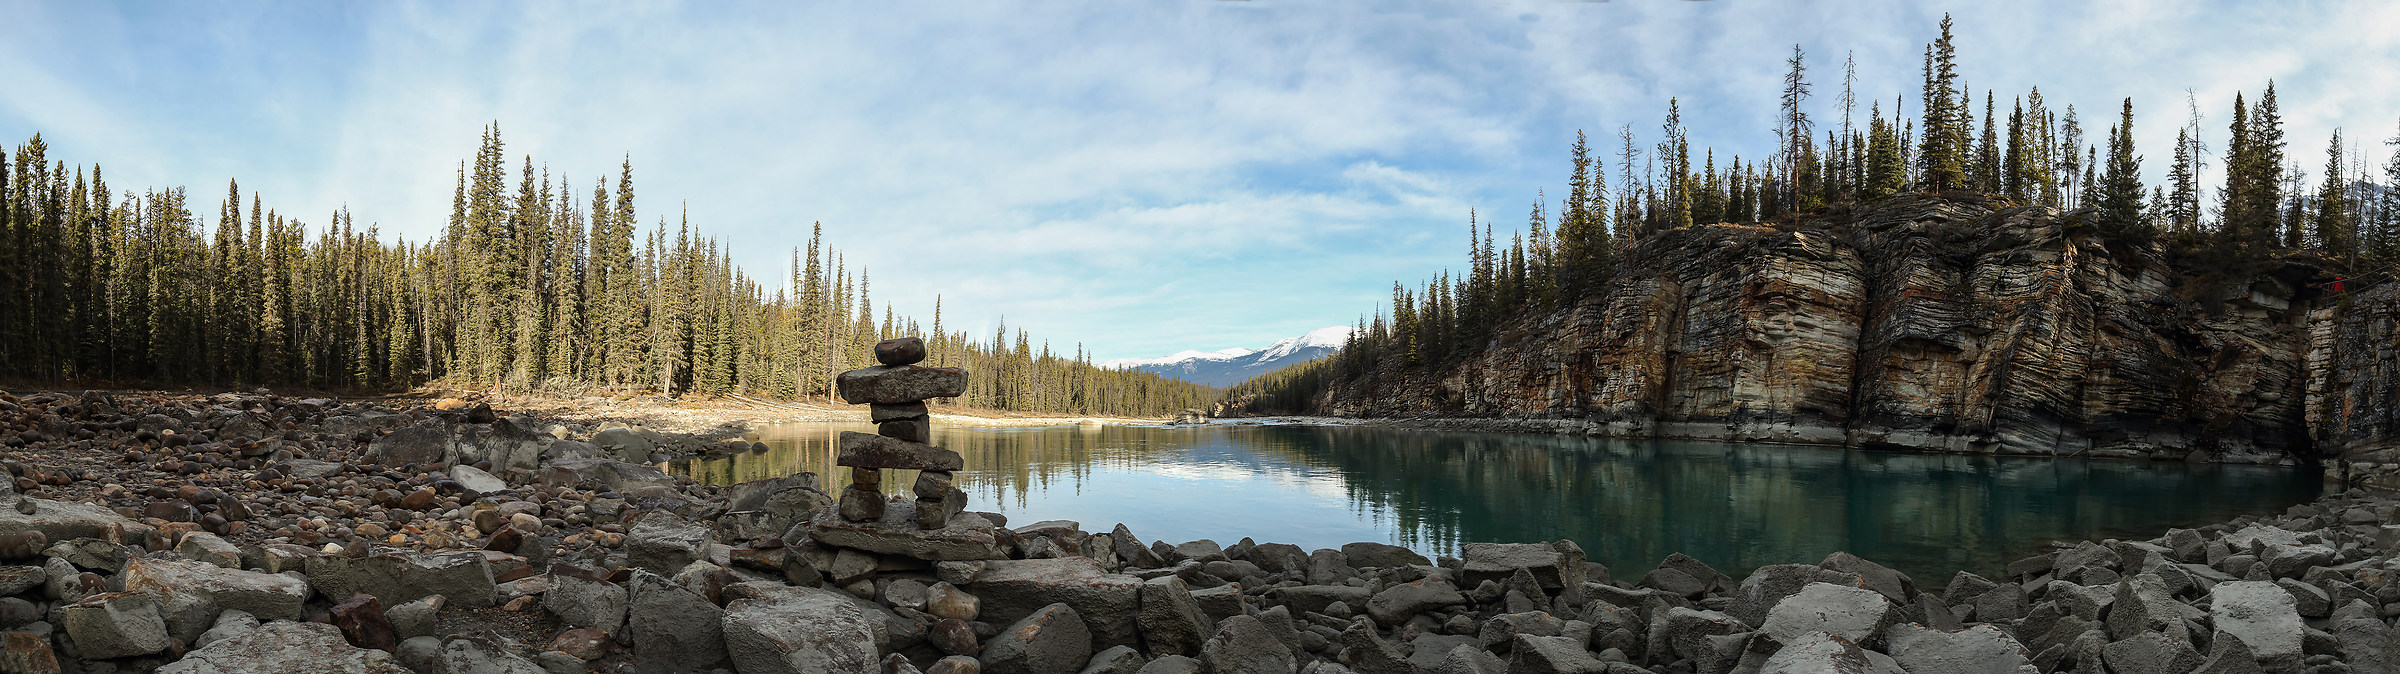 Athabasca river with Inukshuk...